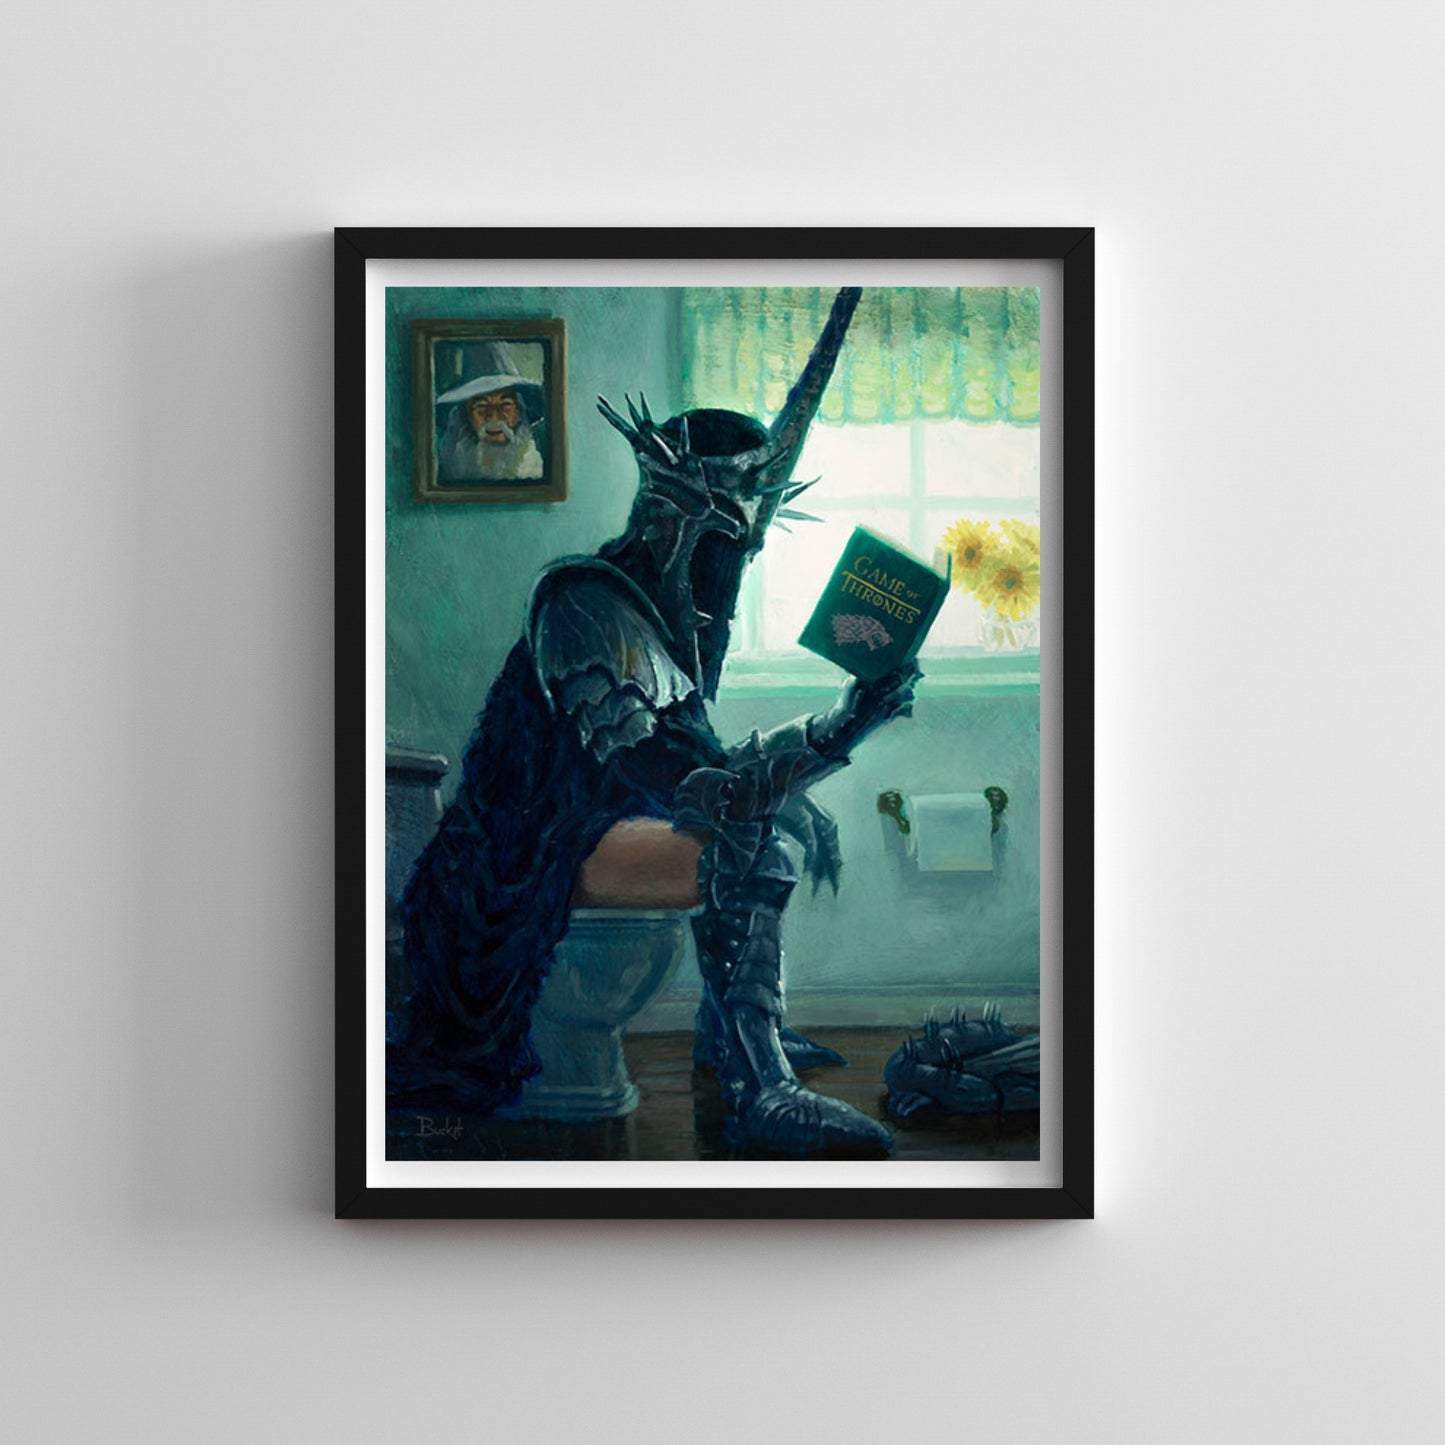 The Witch King (The Lord of the Rings) Bathroom Parody Art Print